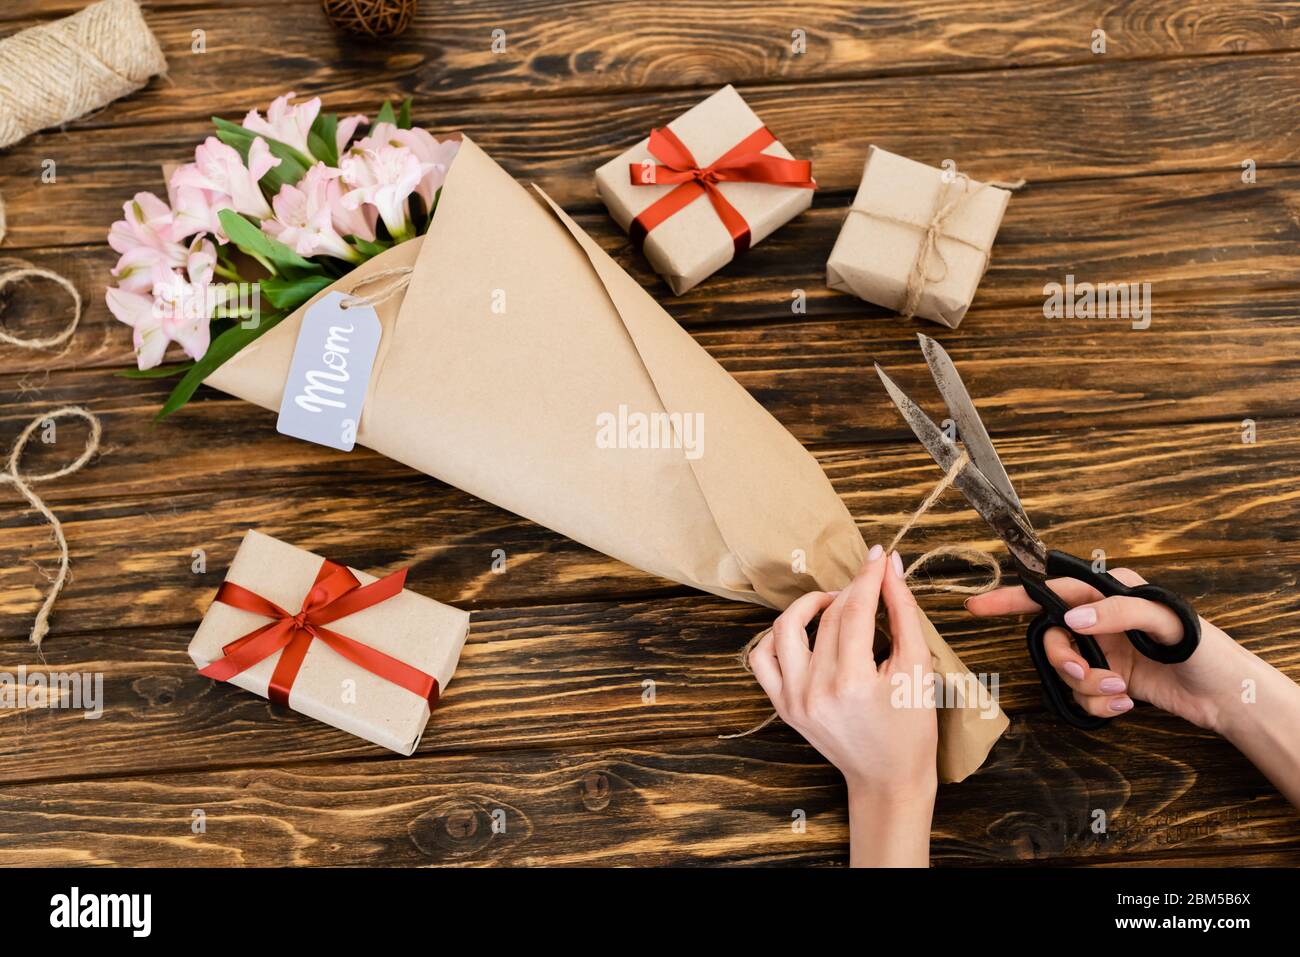 https://c8.alamy.com/comp/2BM5B6X/cropped-view-of-woman-cutting-jute-twine-rope-on-pink-flowers-wrapped-in-paper-near-gift-boxes-and-scissors-mothers-day-concept-2BM5B6X.jpg